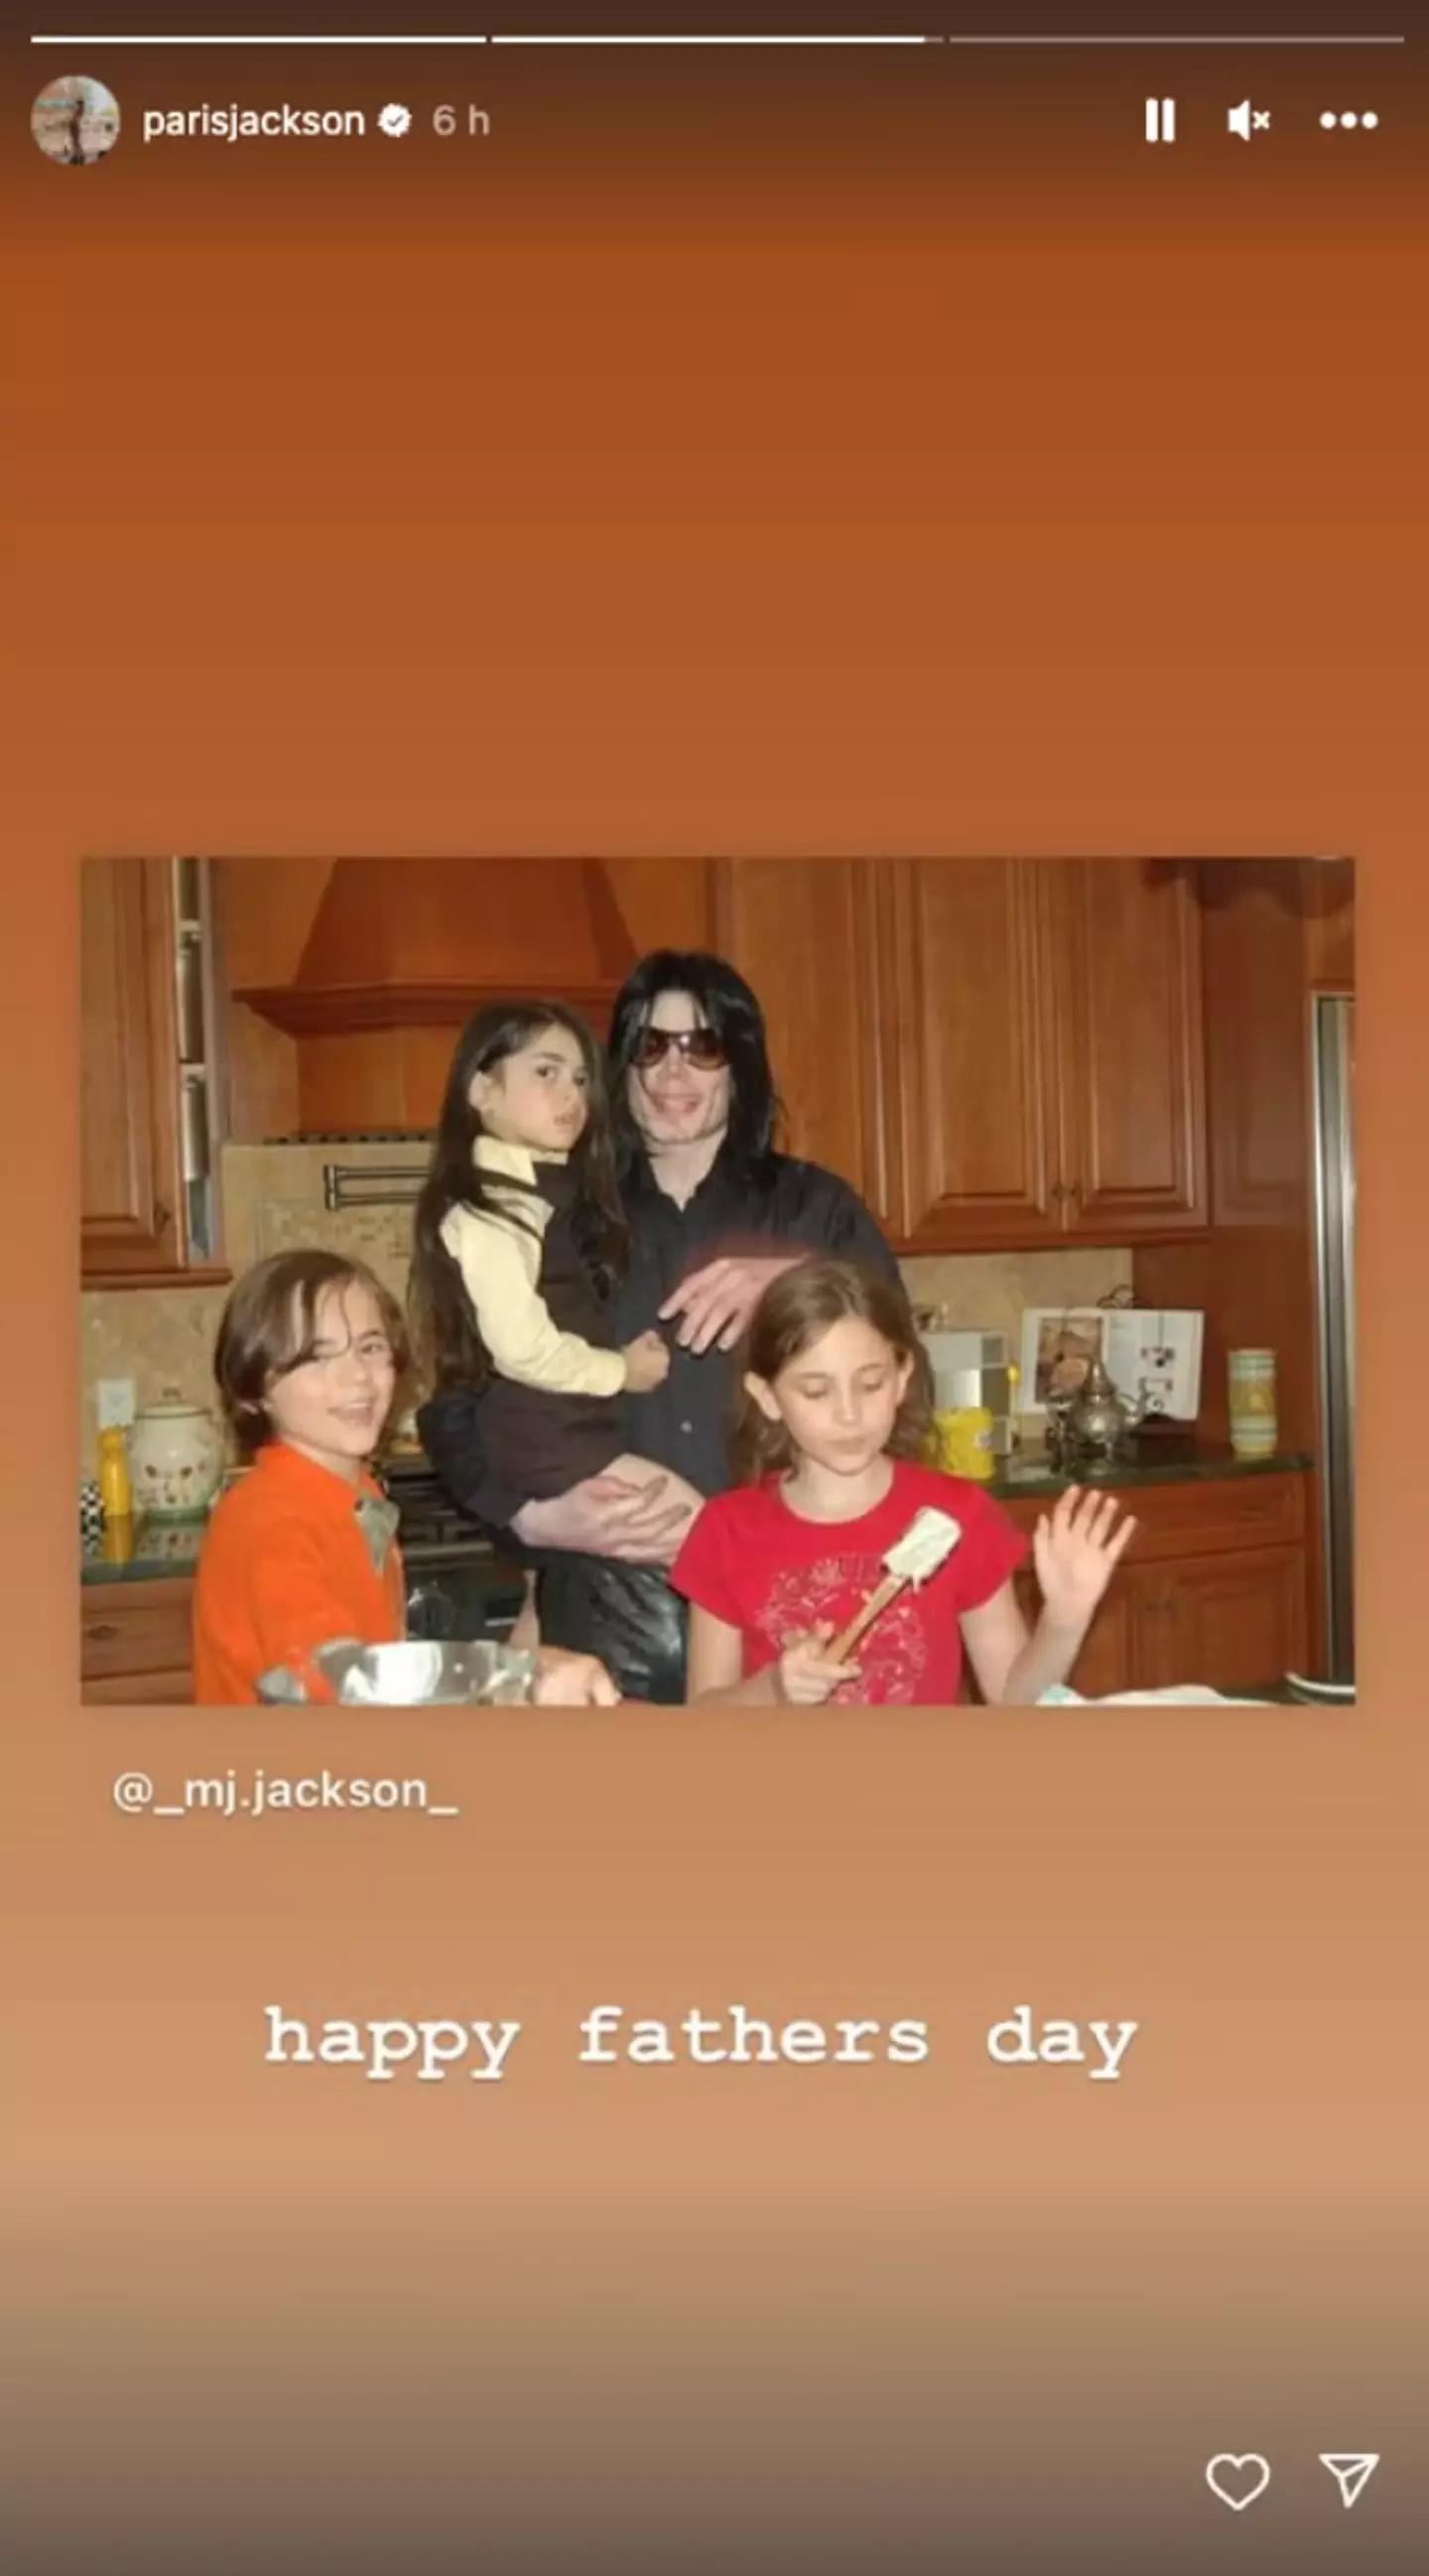 The family can be seen baking a cake in the throwback post.